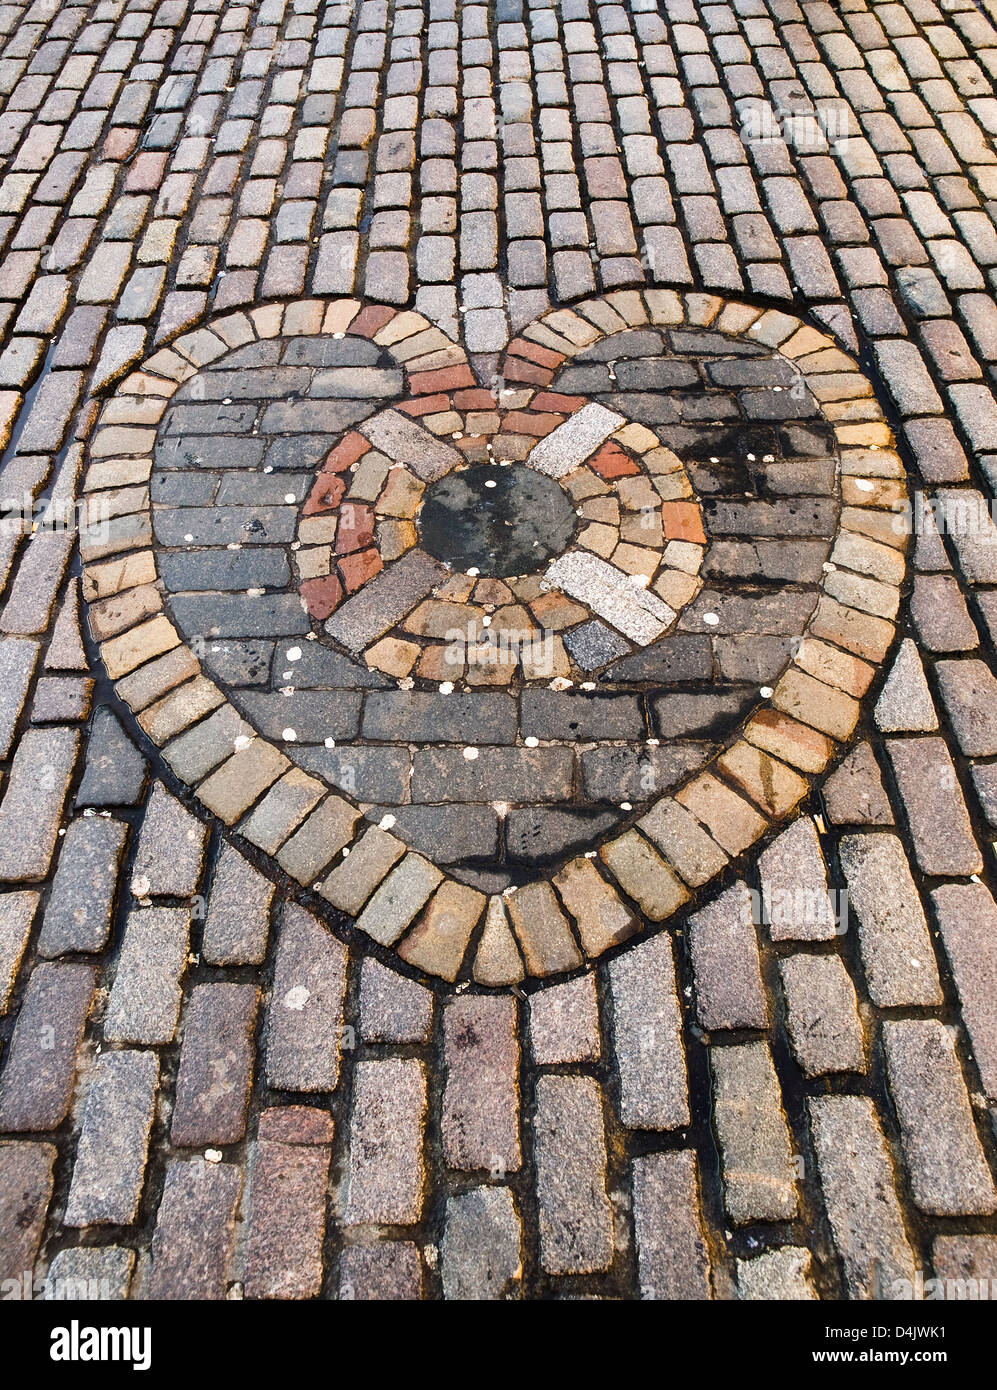 Heart made of stone pavers. The heart is situated in the Scottish city of Edinburgh. Stock Photo